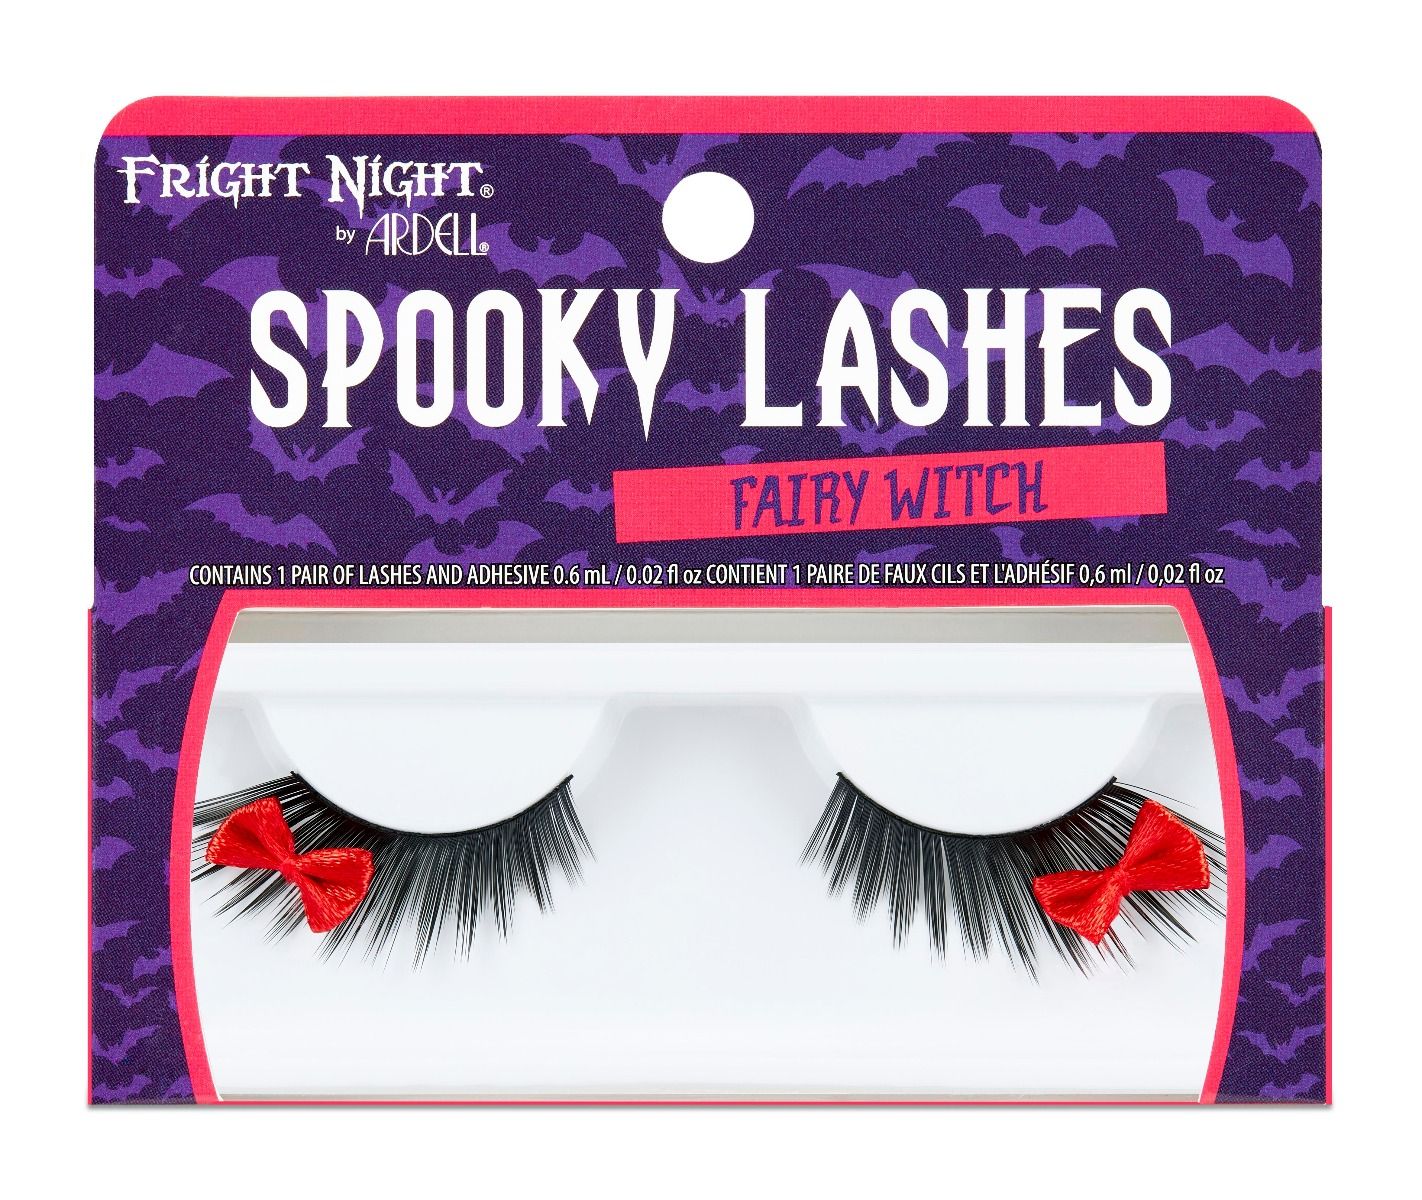 Ardell Fright Night Spooky Lashes - FAIRY WITCH